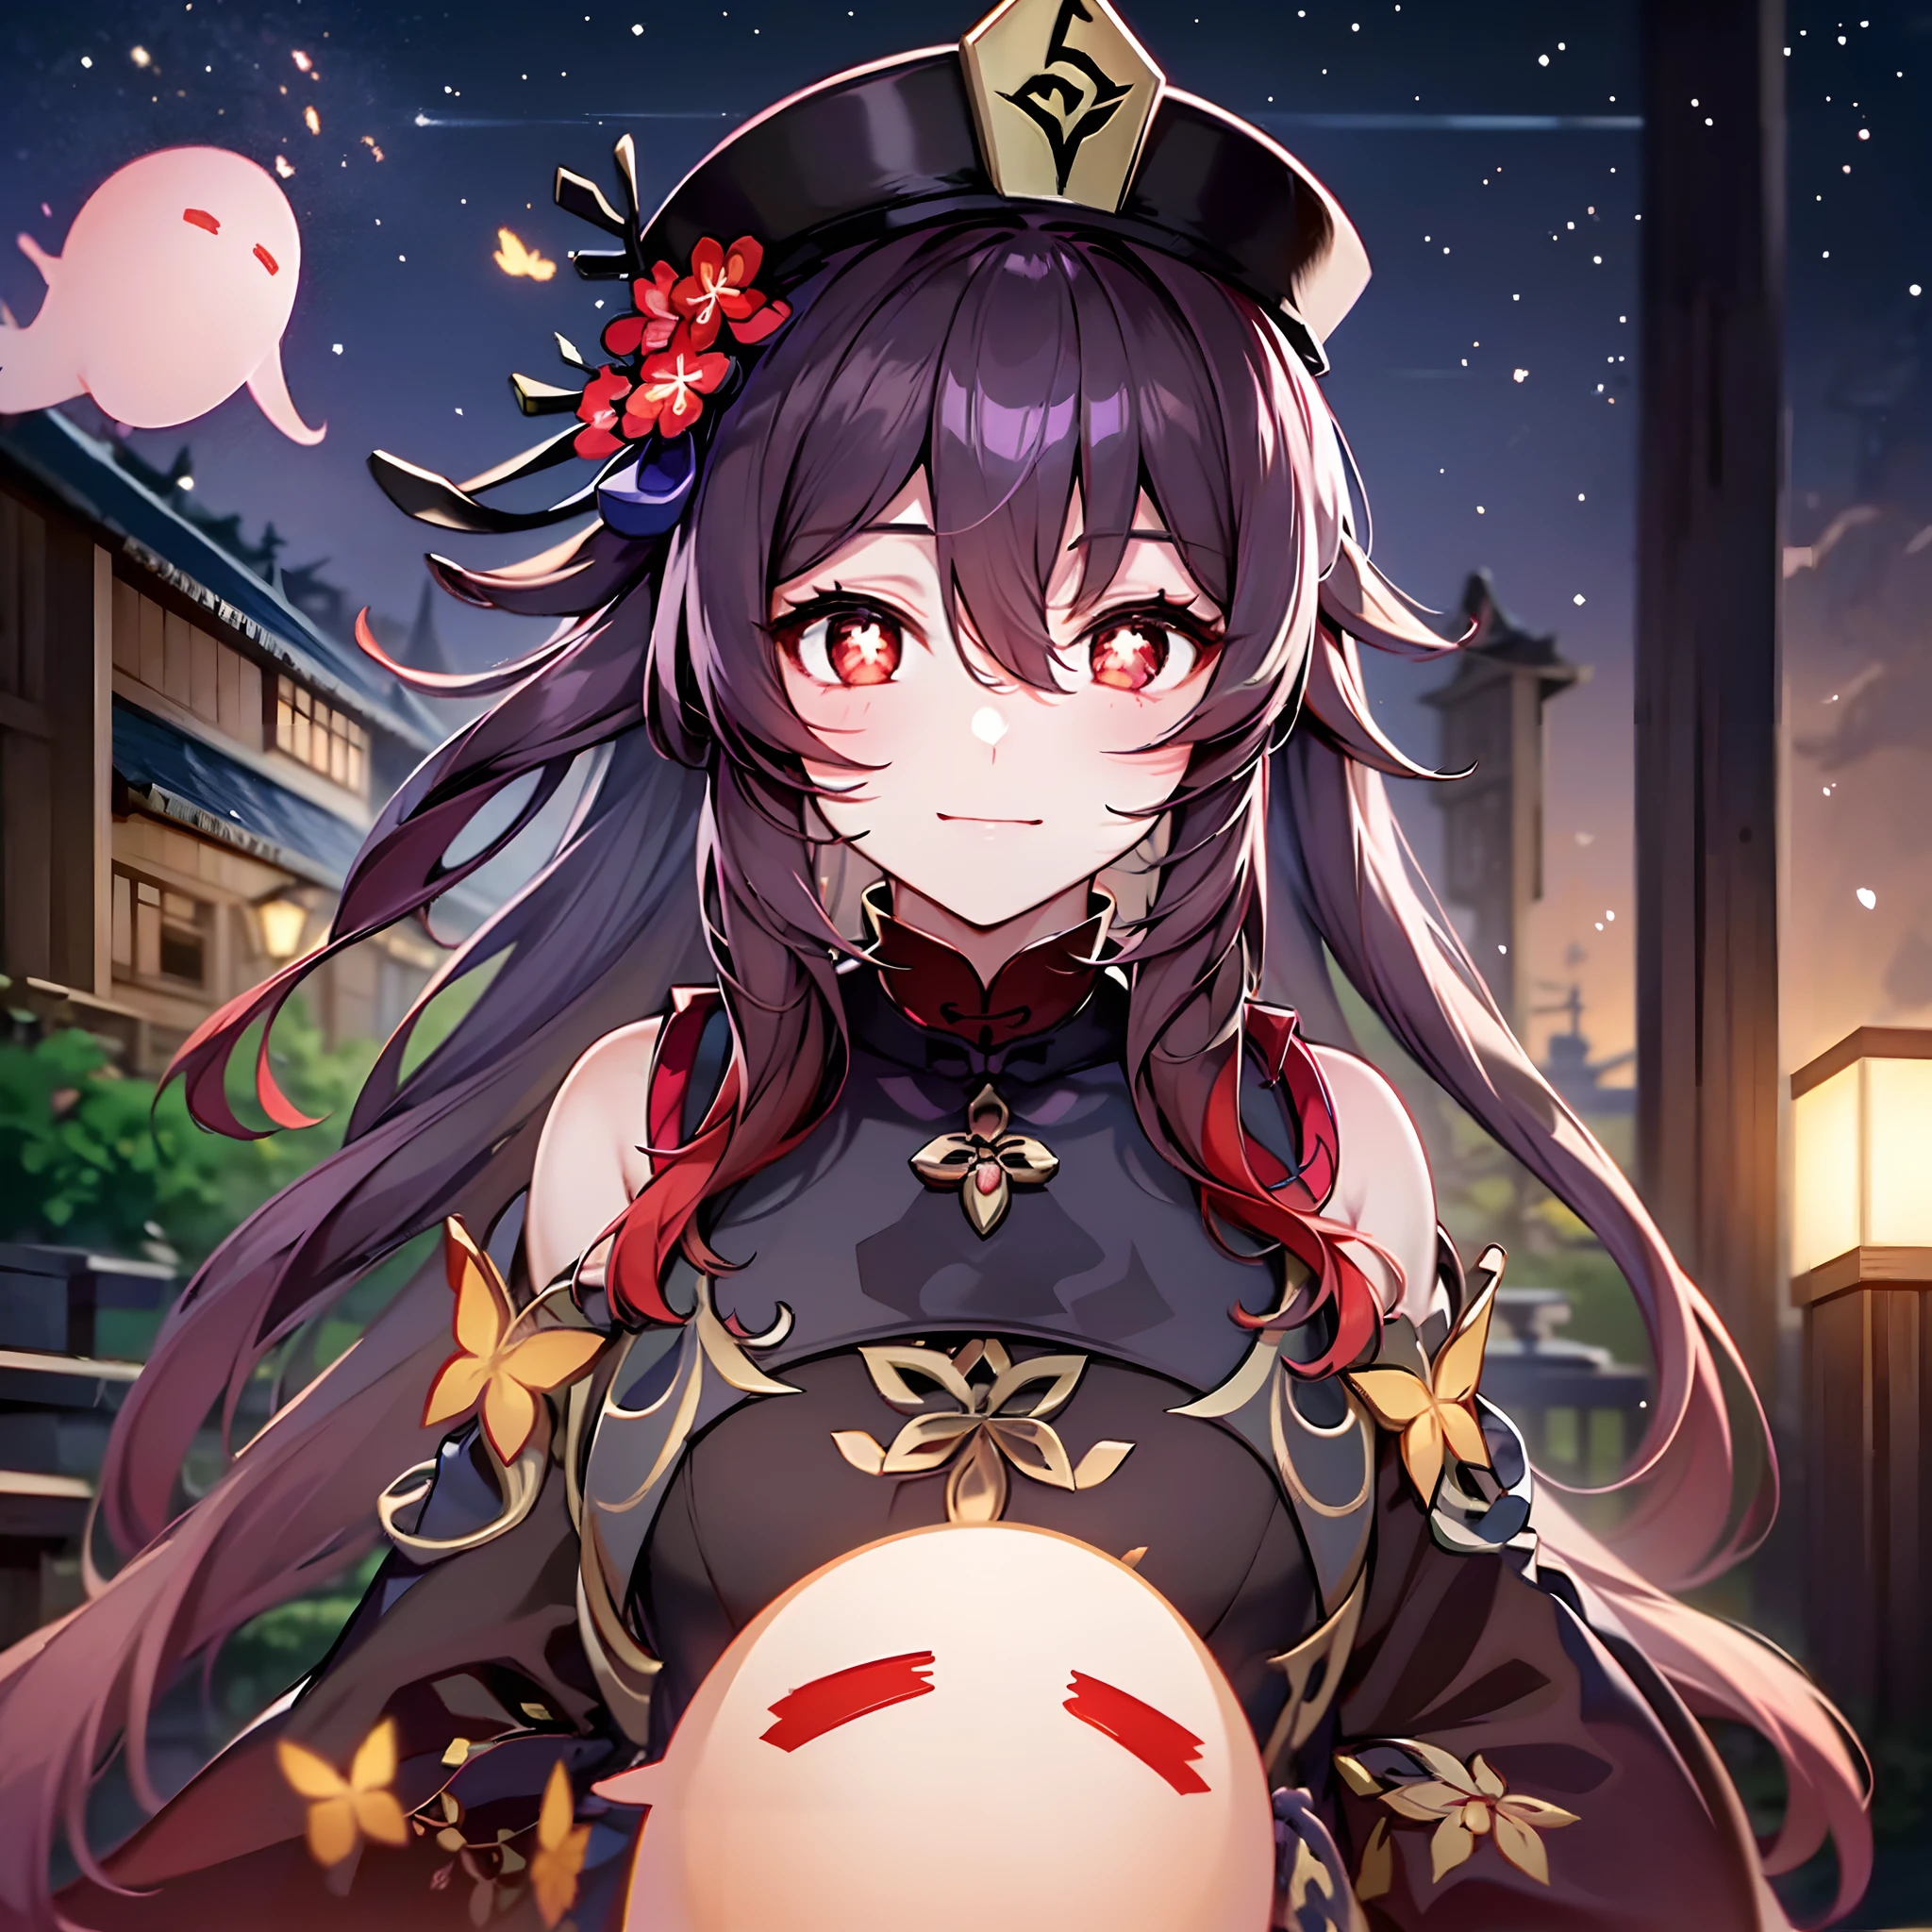 Anime girl with long hair and hat and ghost, Ayaka Genshin Impact, from arknights, shalltear bloodfallen, characters from azur lane, ayaka game genshin impact, from the azur lane videogame, genshin impact character, Genshin, Representation of ghosts, avatar image, nightcore, tired and haunted expression　　the original god　Hu Tao　Girls are cute　​masterpiece